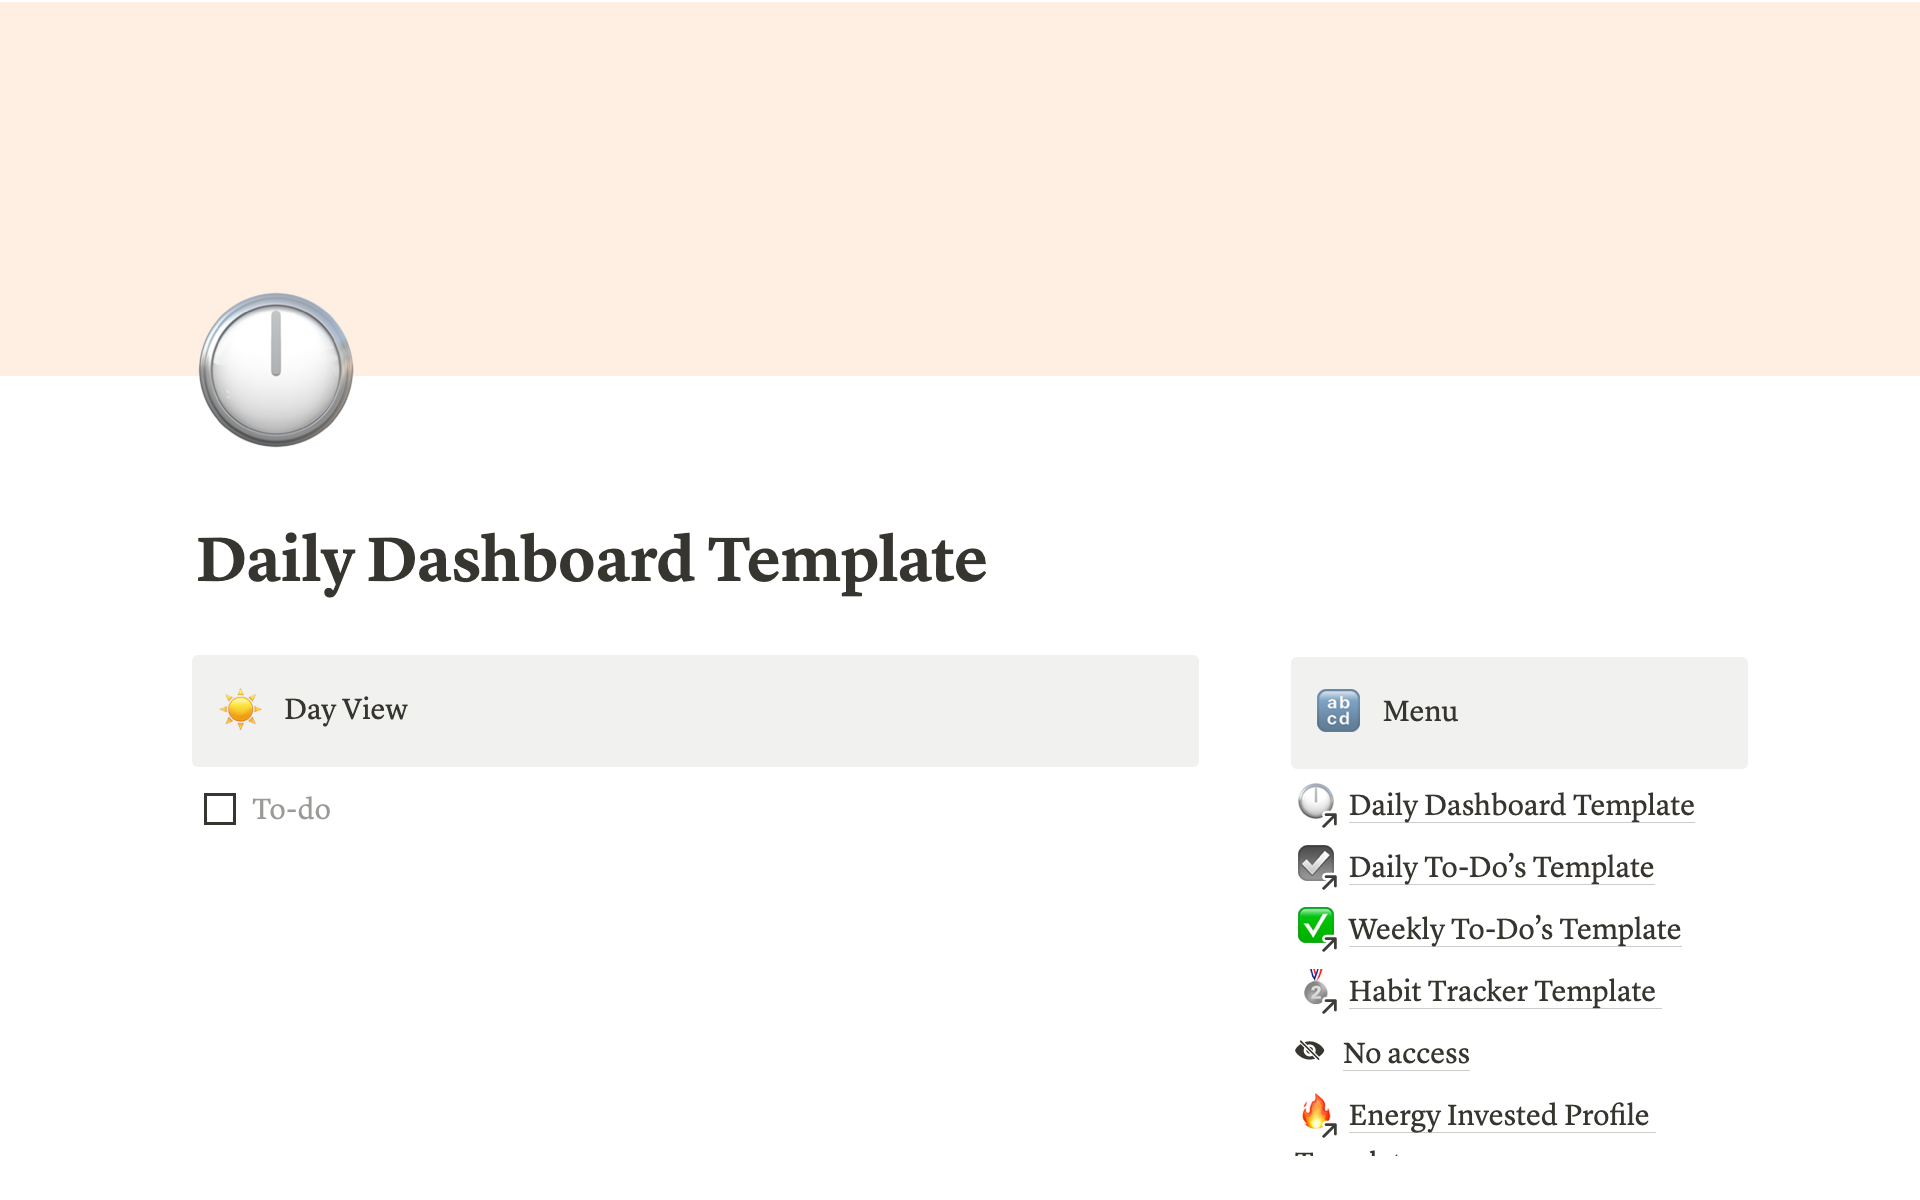 This templates helps you manage all aspects of your life in one single view.